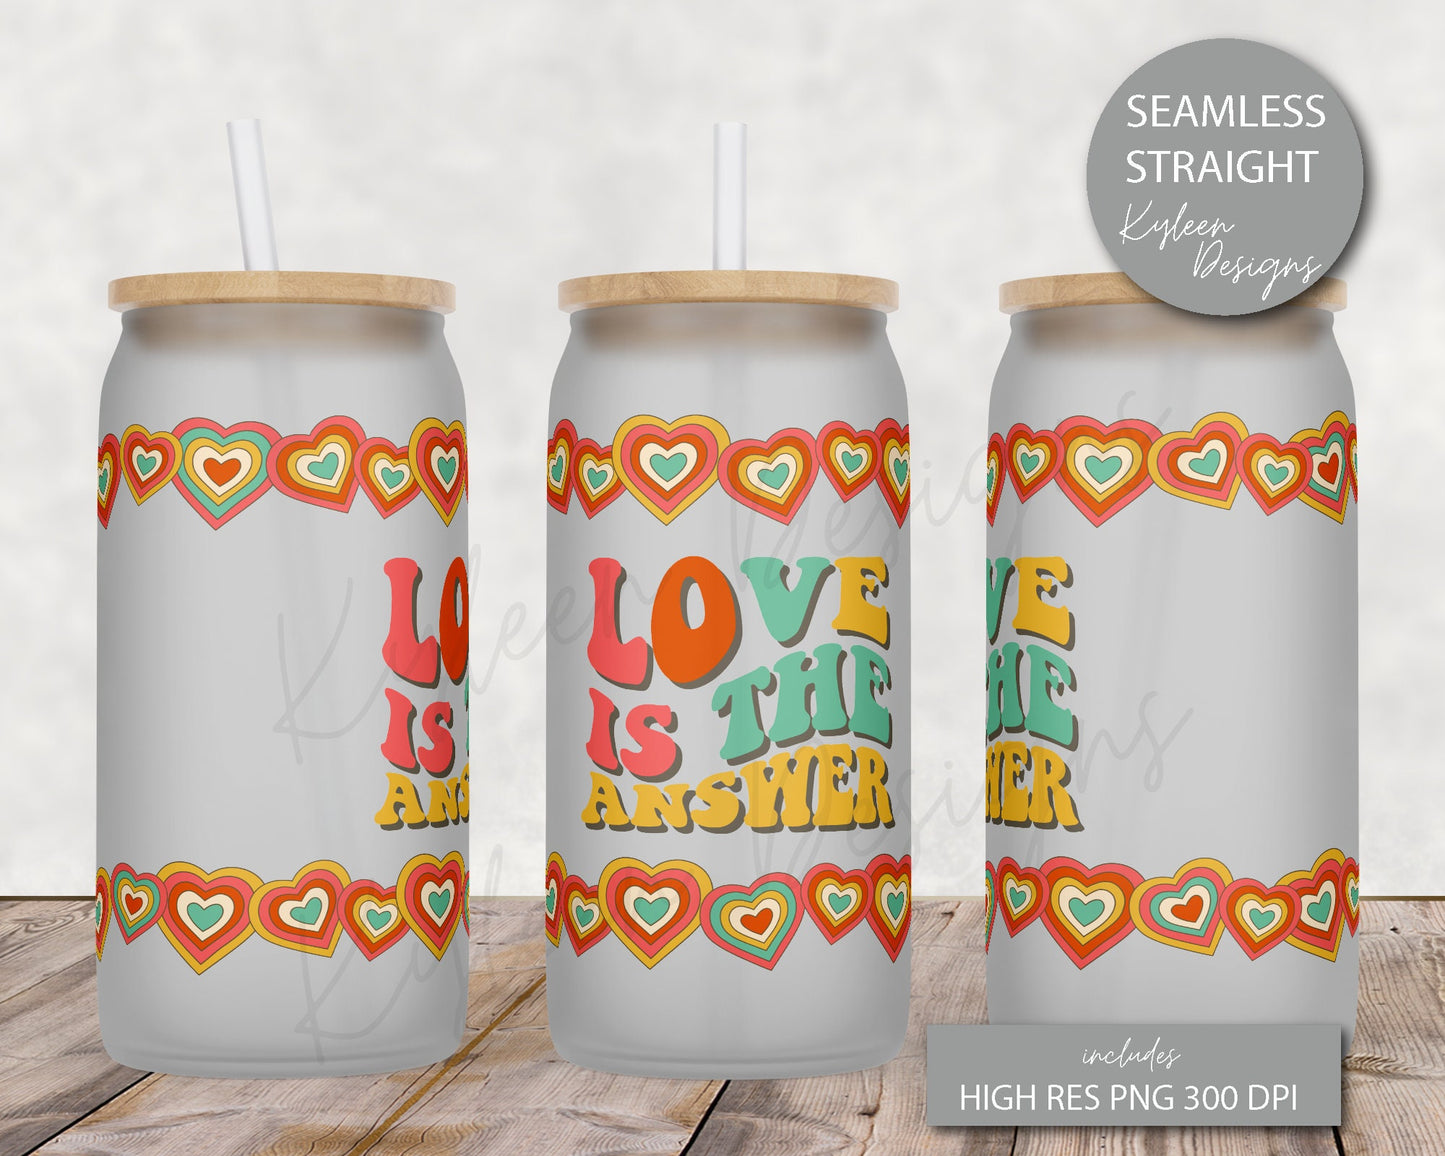 SEAMLESS 16 ounce beer glass love is the answer High RES PNG for coffee/beer glass